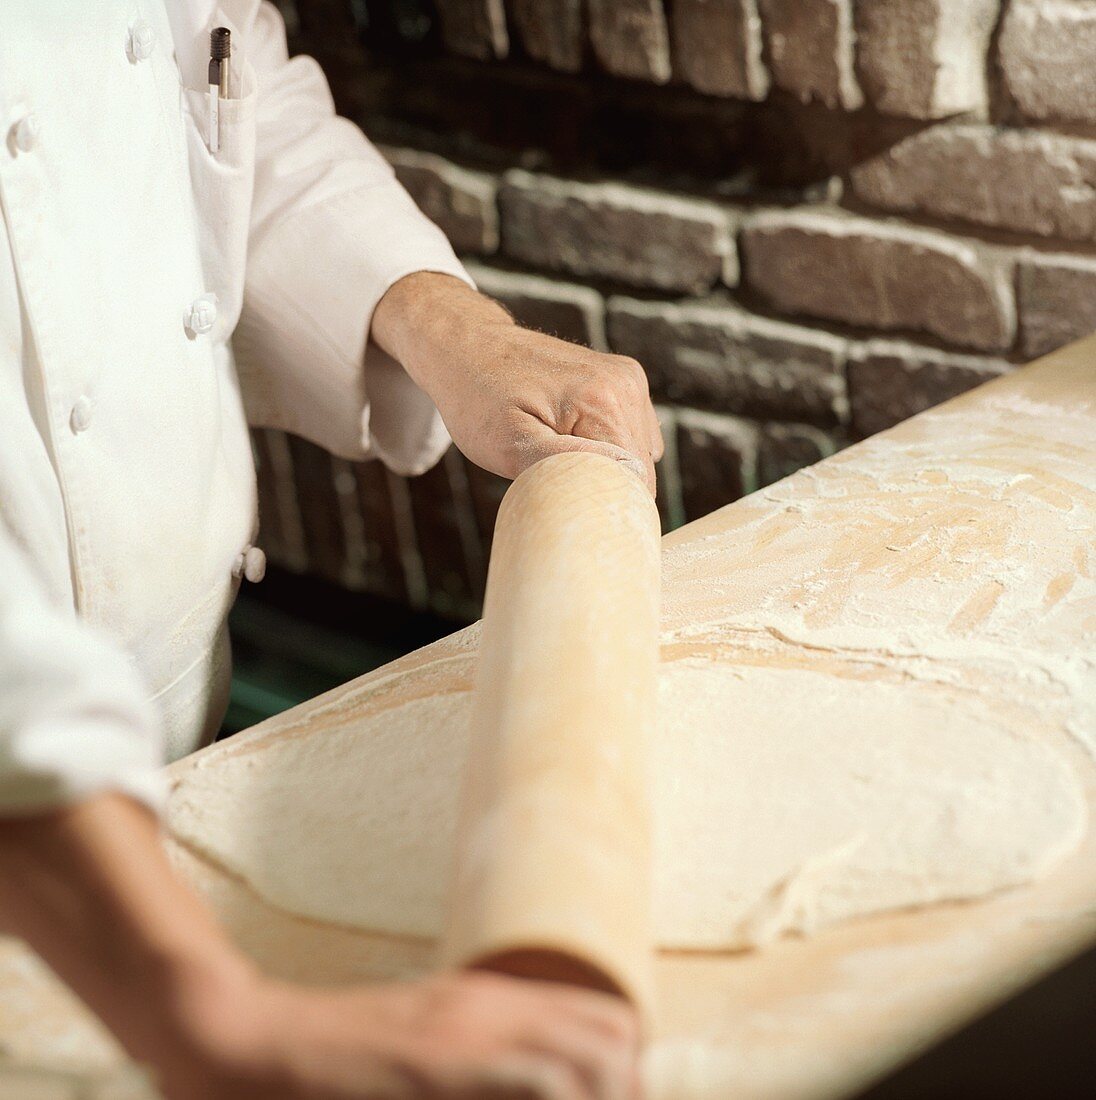 Chef Rolling Dough with a Wooden Rolling Pin